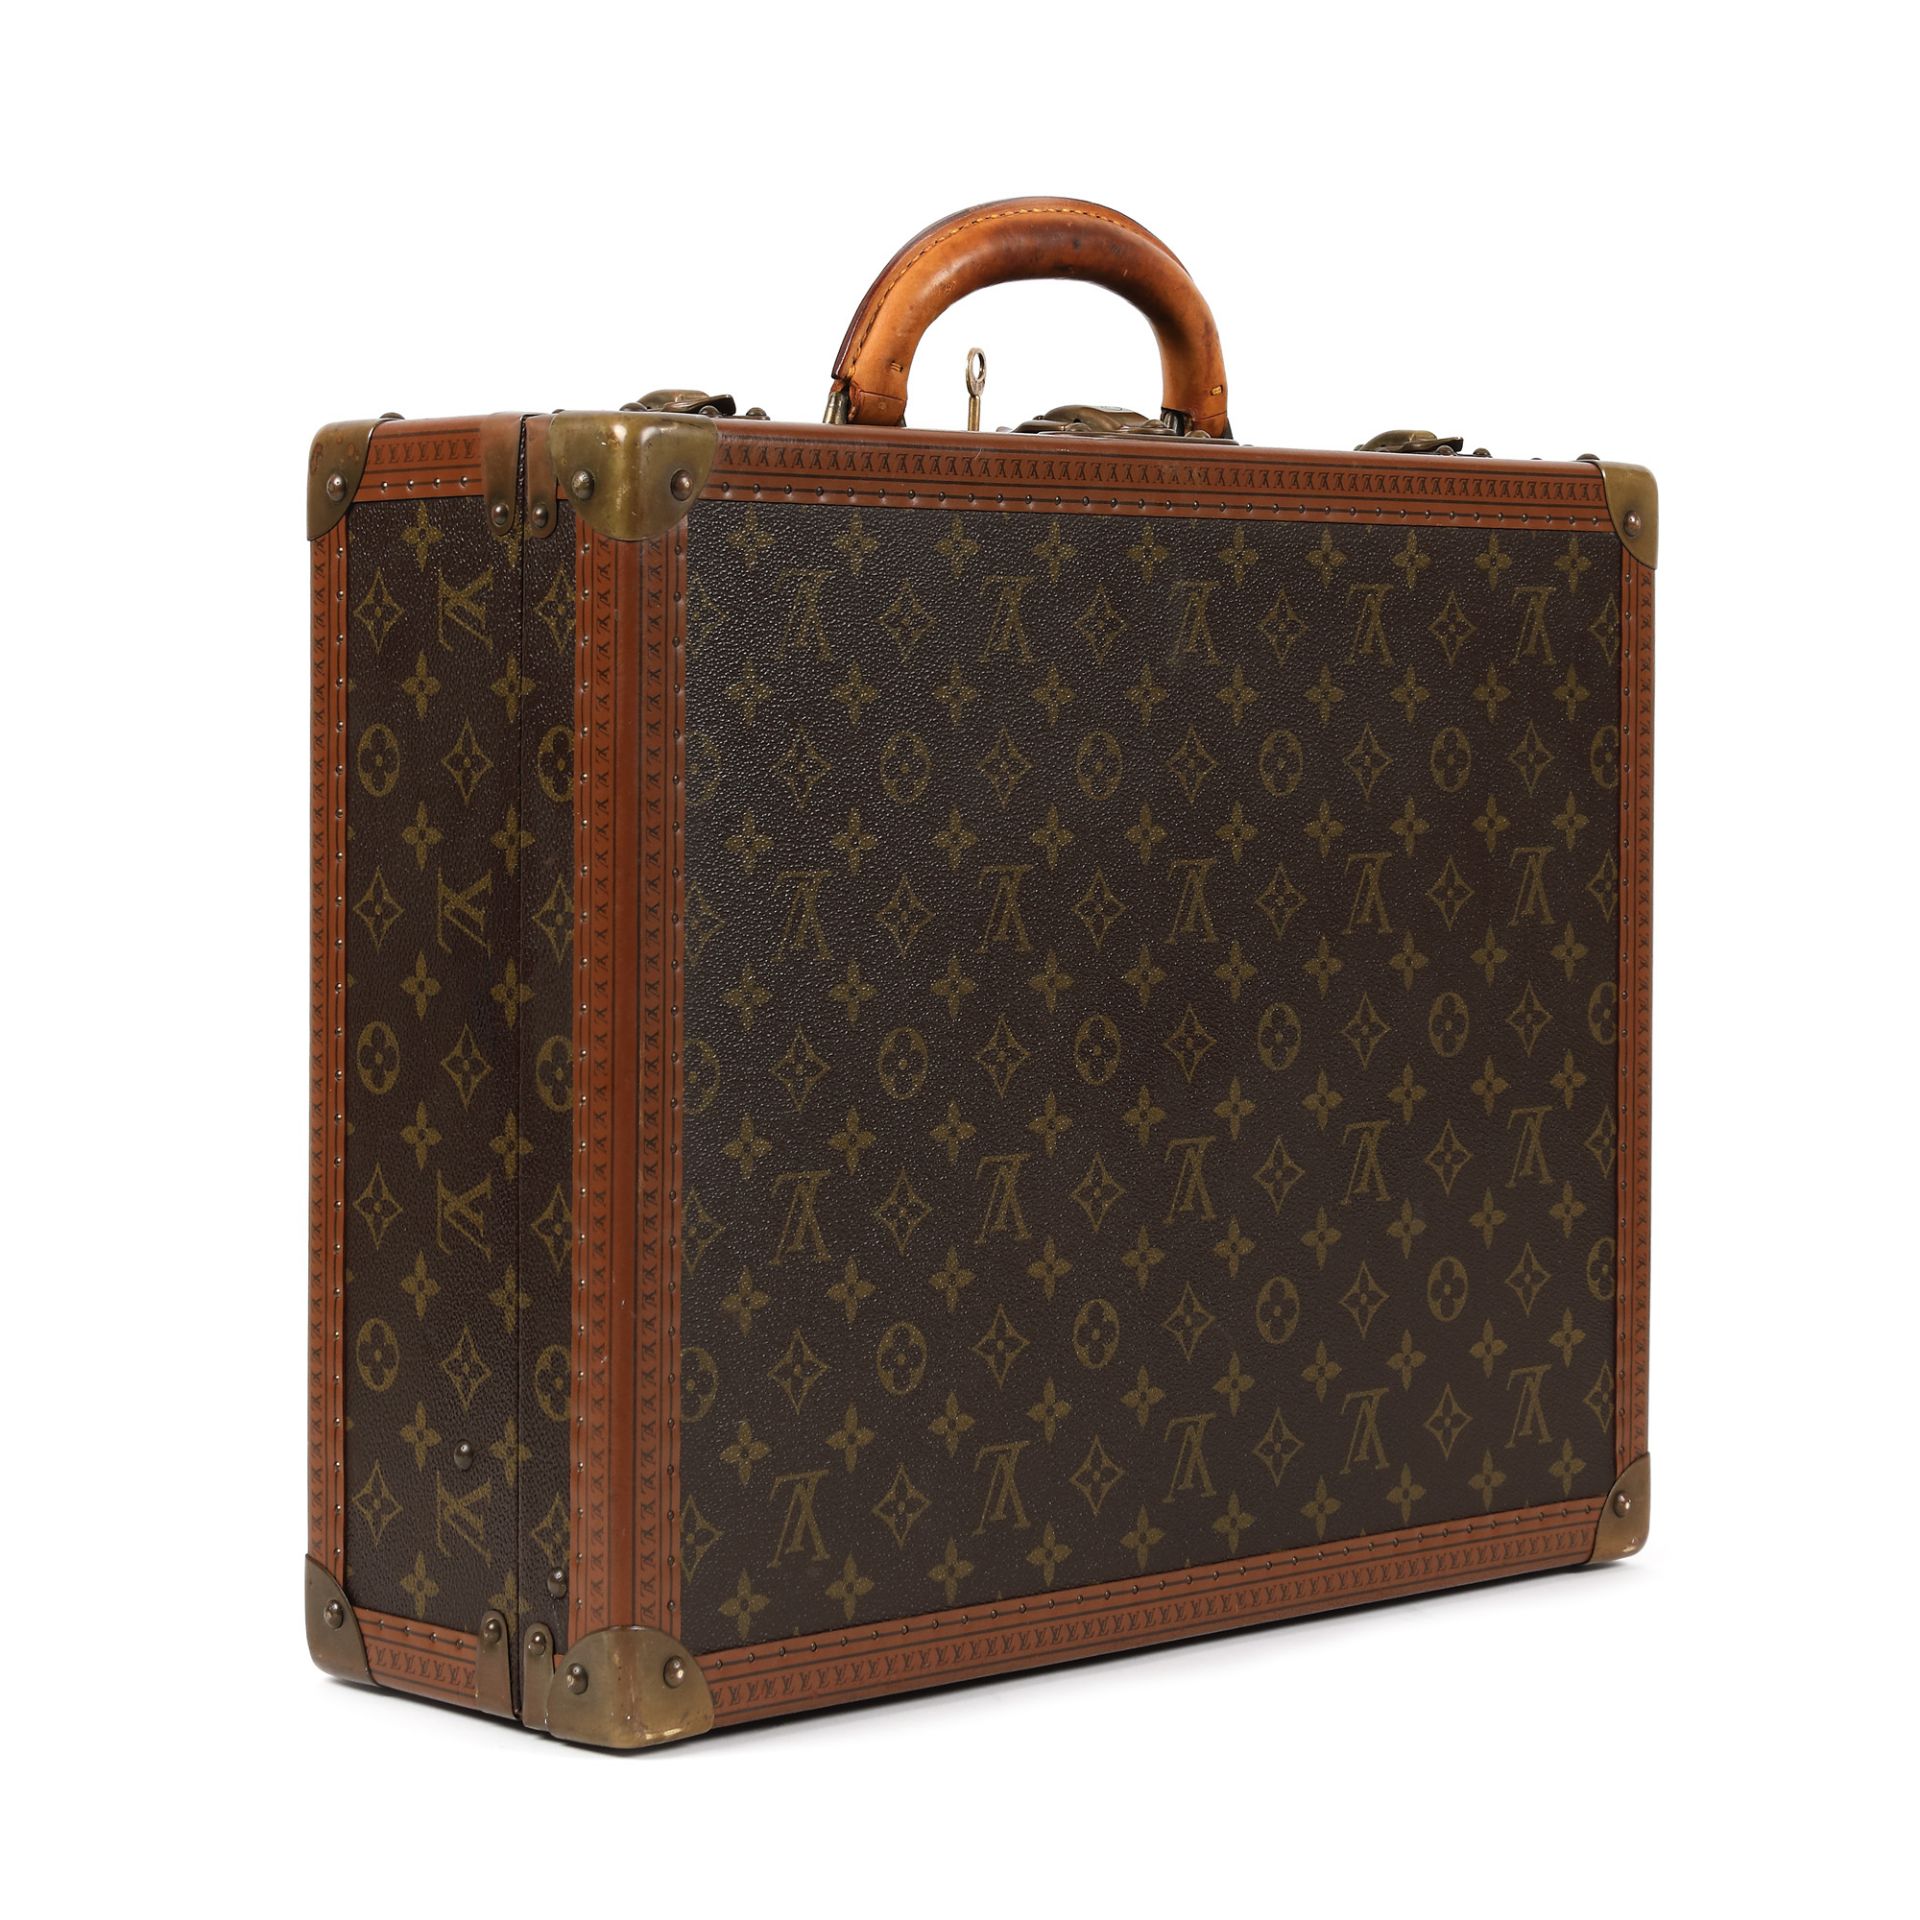 Pair of Louis Vuitton suitcases for travel - Image 5 of 8